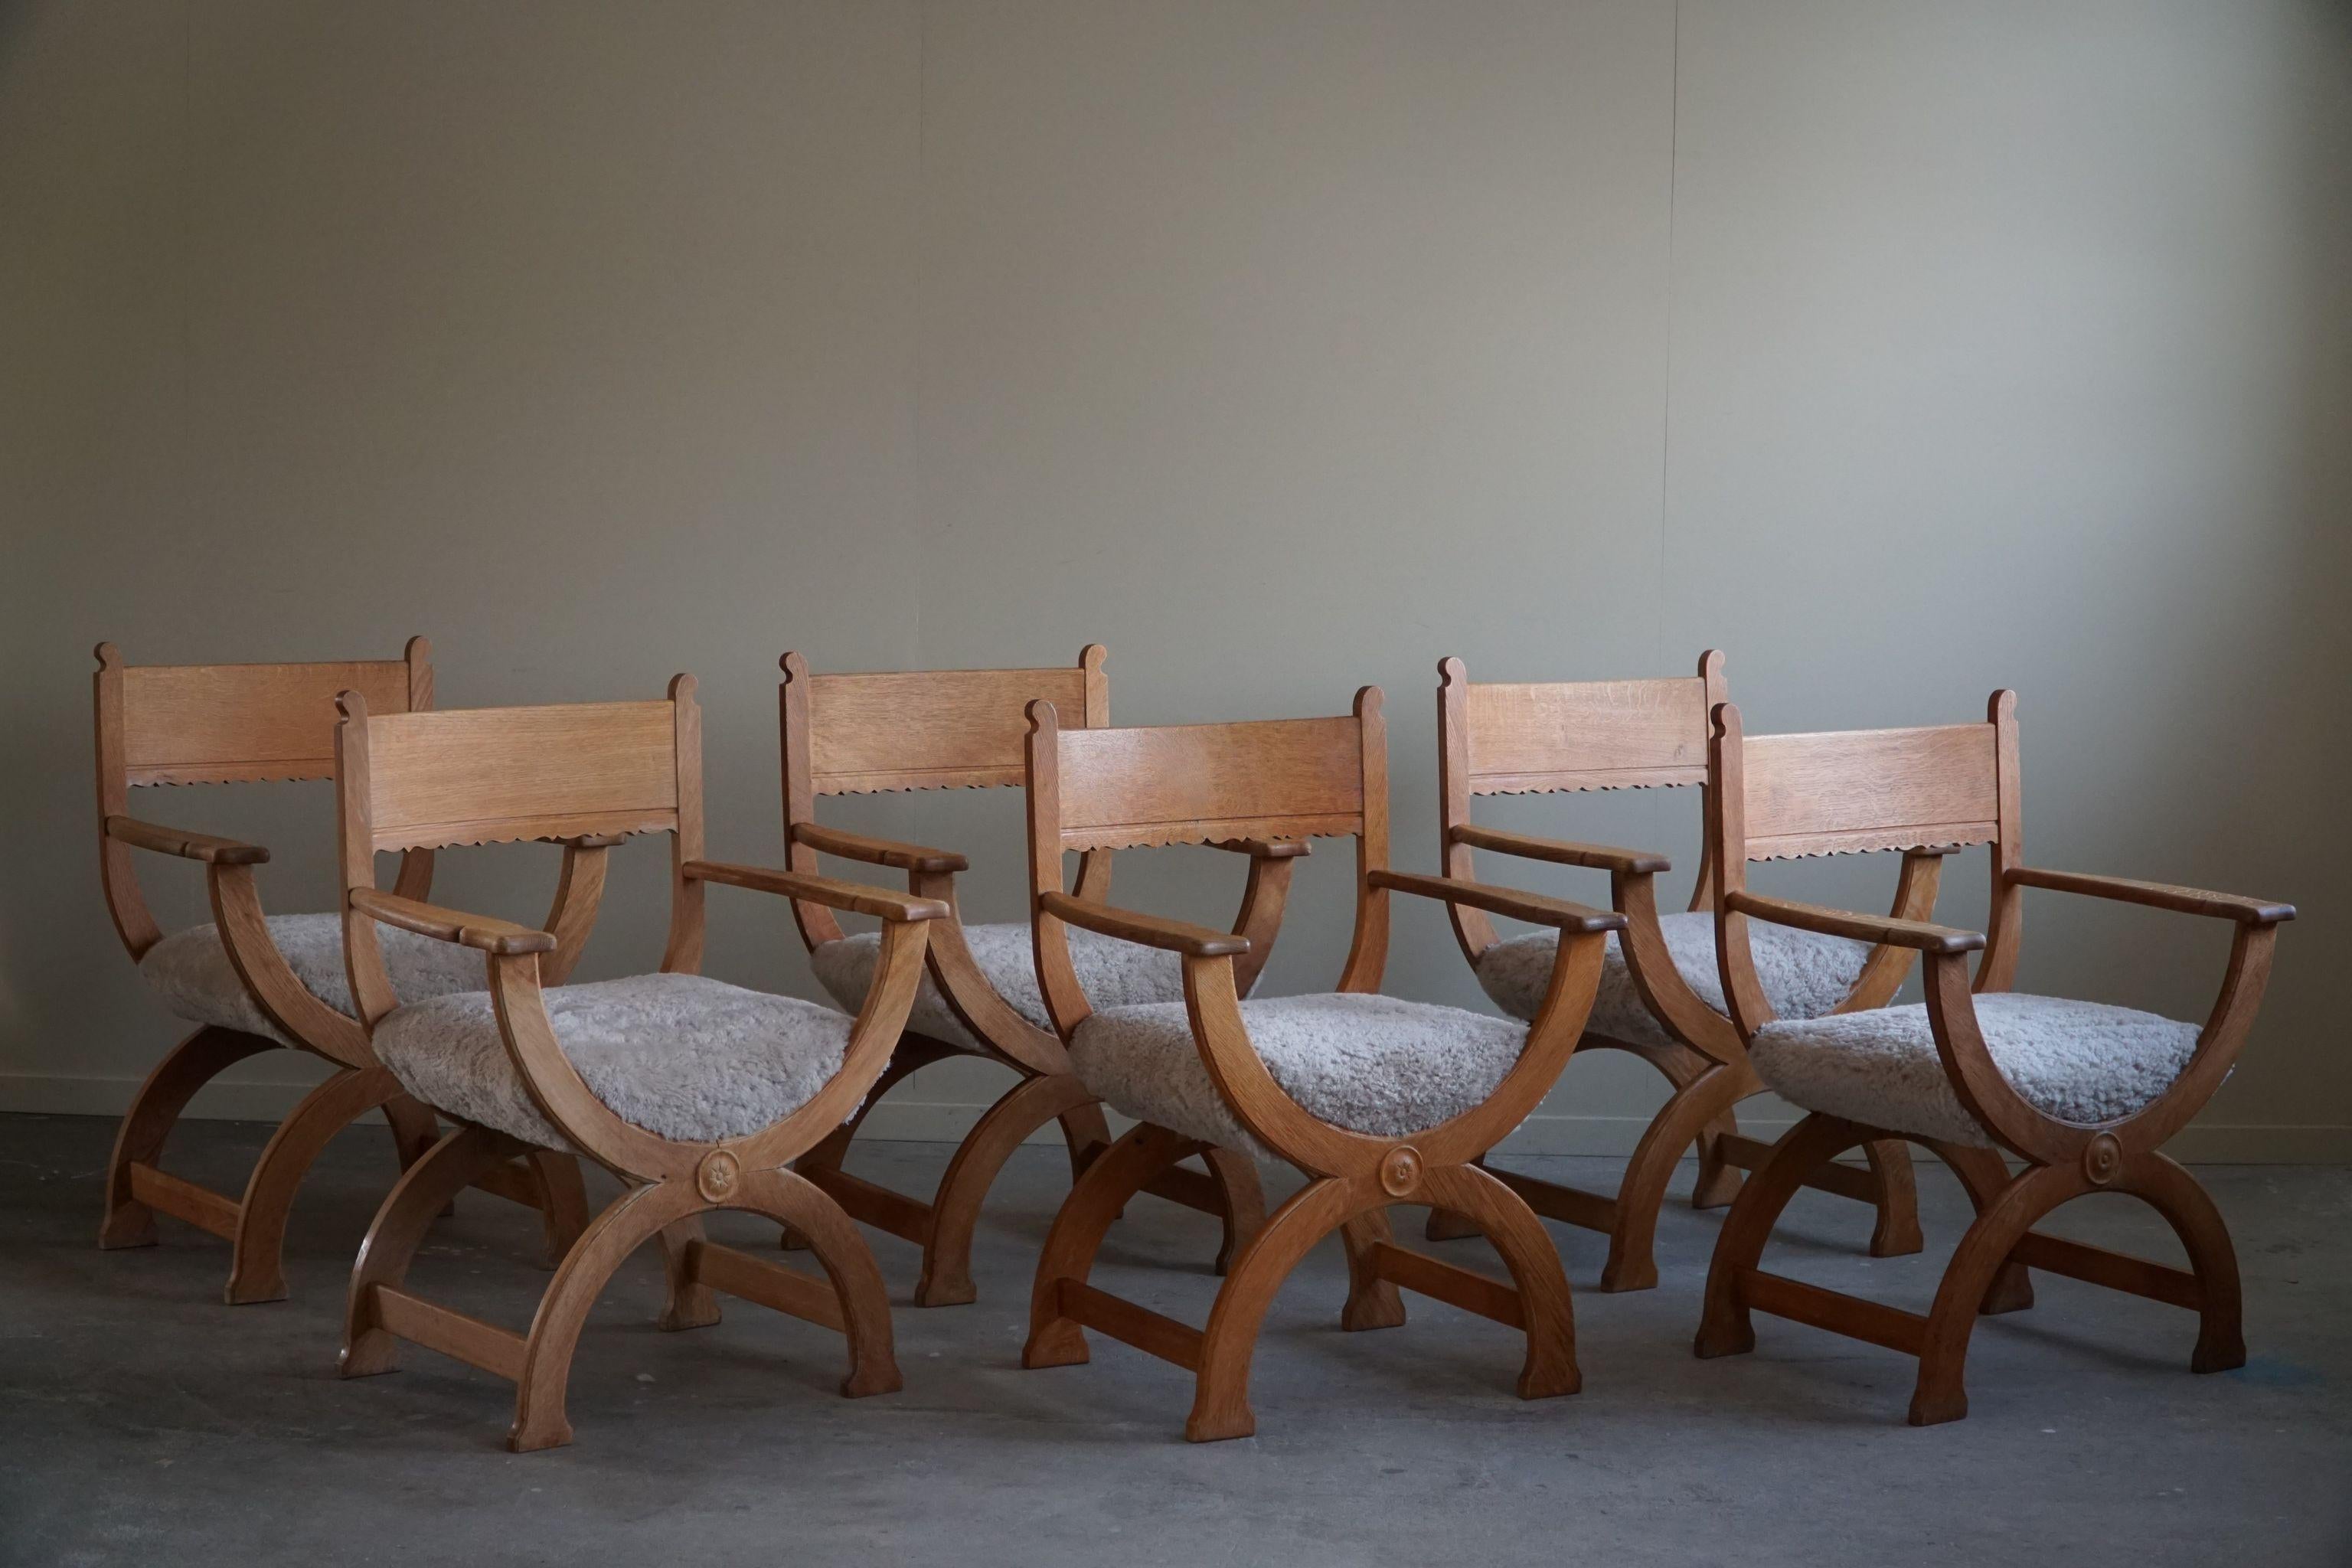 A fine and rare set of 6 armchairs in oak, reupholstered seats in a great quality shearling lambswool. Designed by Henning Kjaernulf for EG Kvalitetsmøbel, Denmark in the 1960s. 

The overall impression of these mid century chairs is really good,